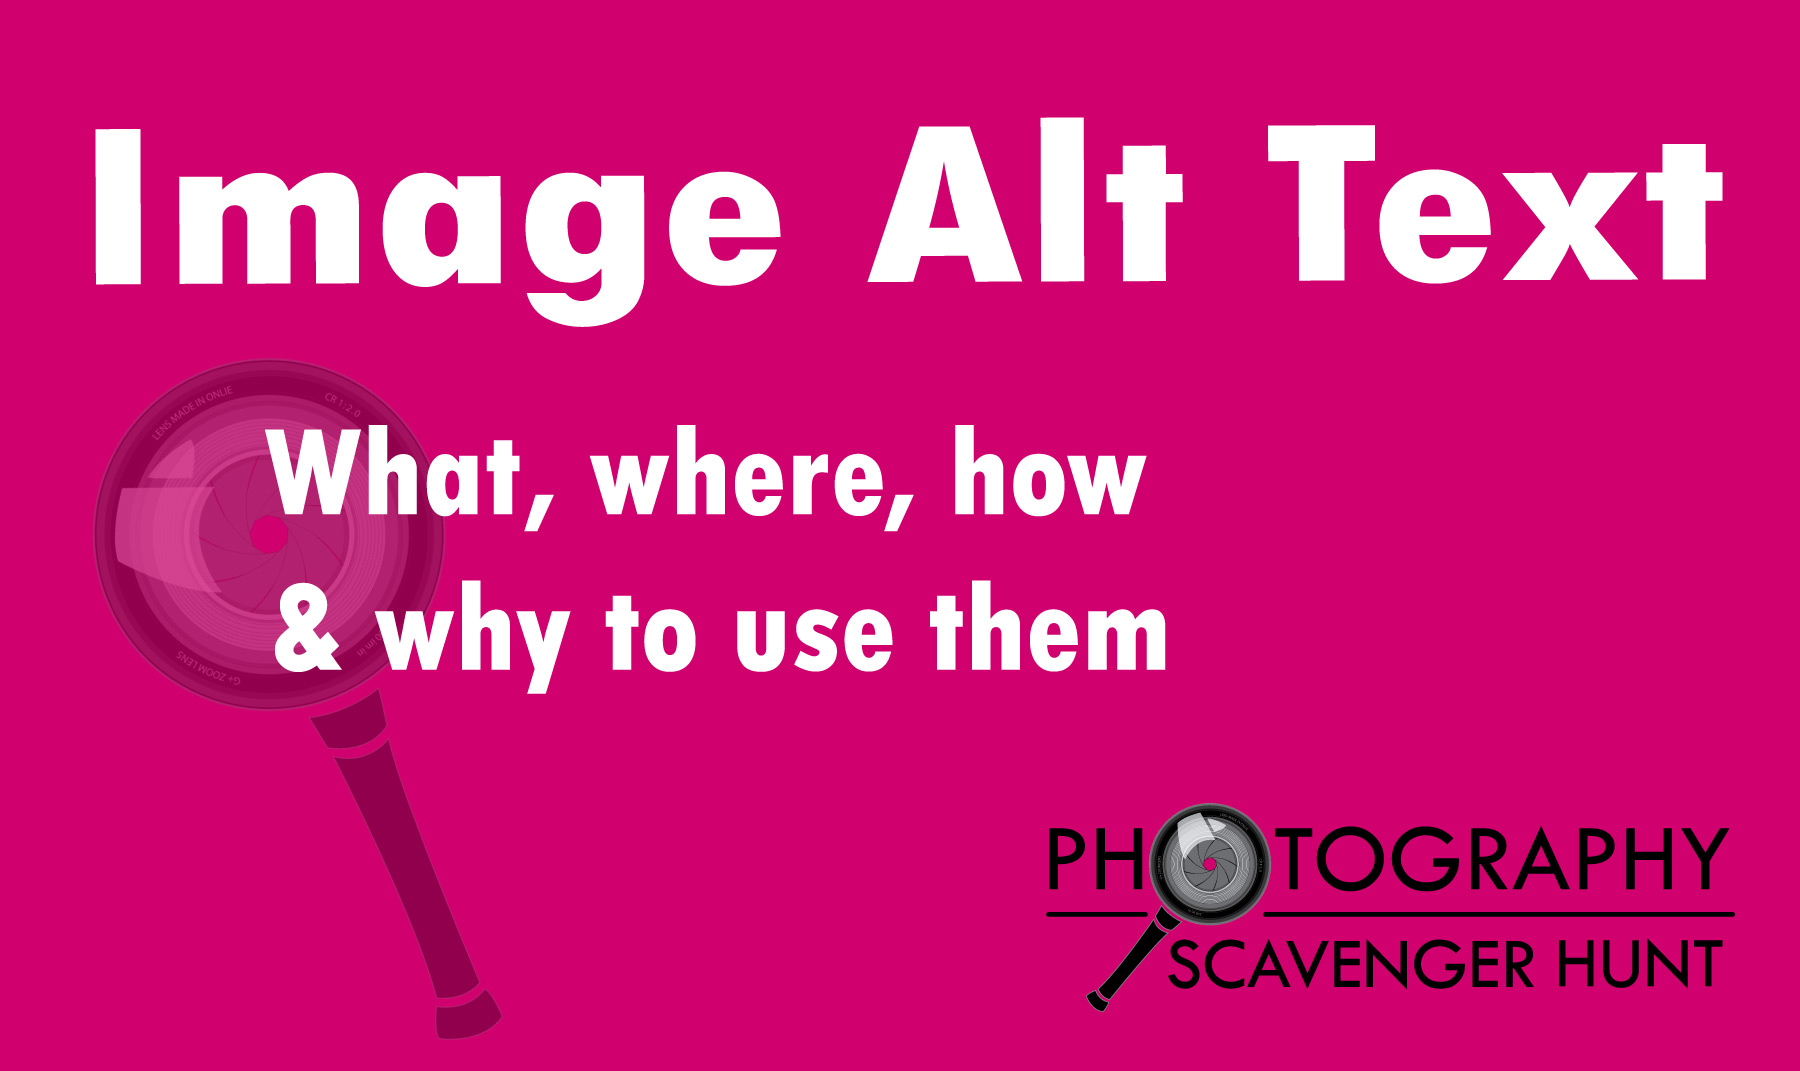 Text on hot pink background that says Image Alt Text - what, where, how & why to use them. Photography Scavenger hunt logo in lower right corner